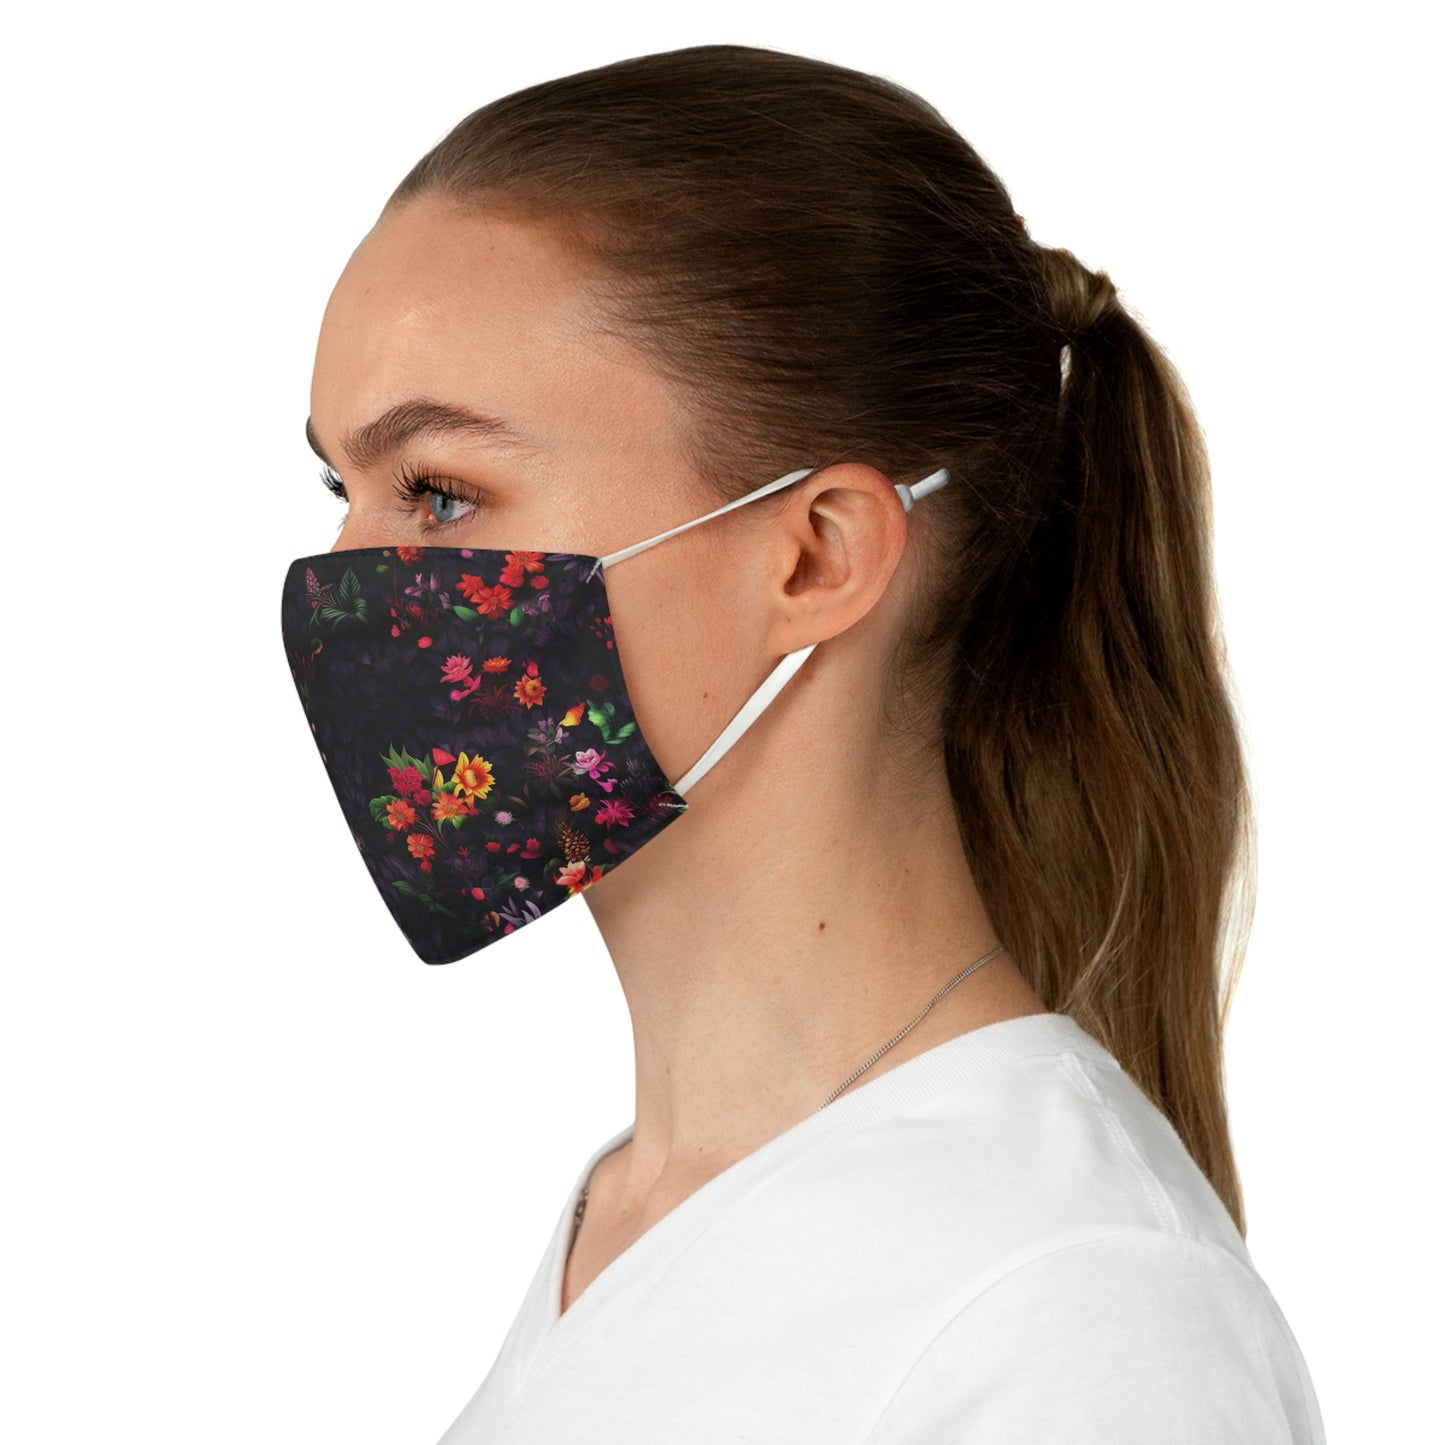 Neduz Designs Artified Floral Print Fabric Face Mask - Stylish and Protective